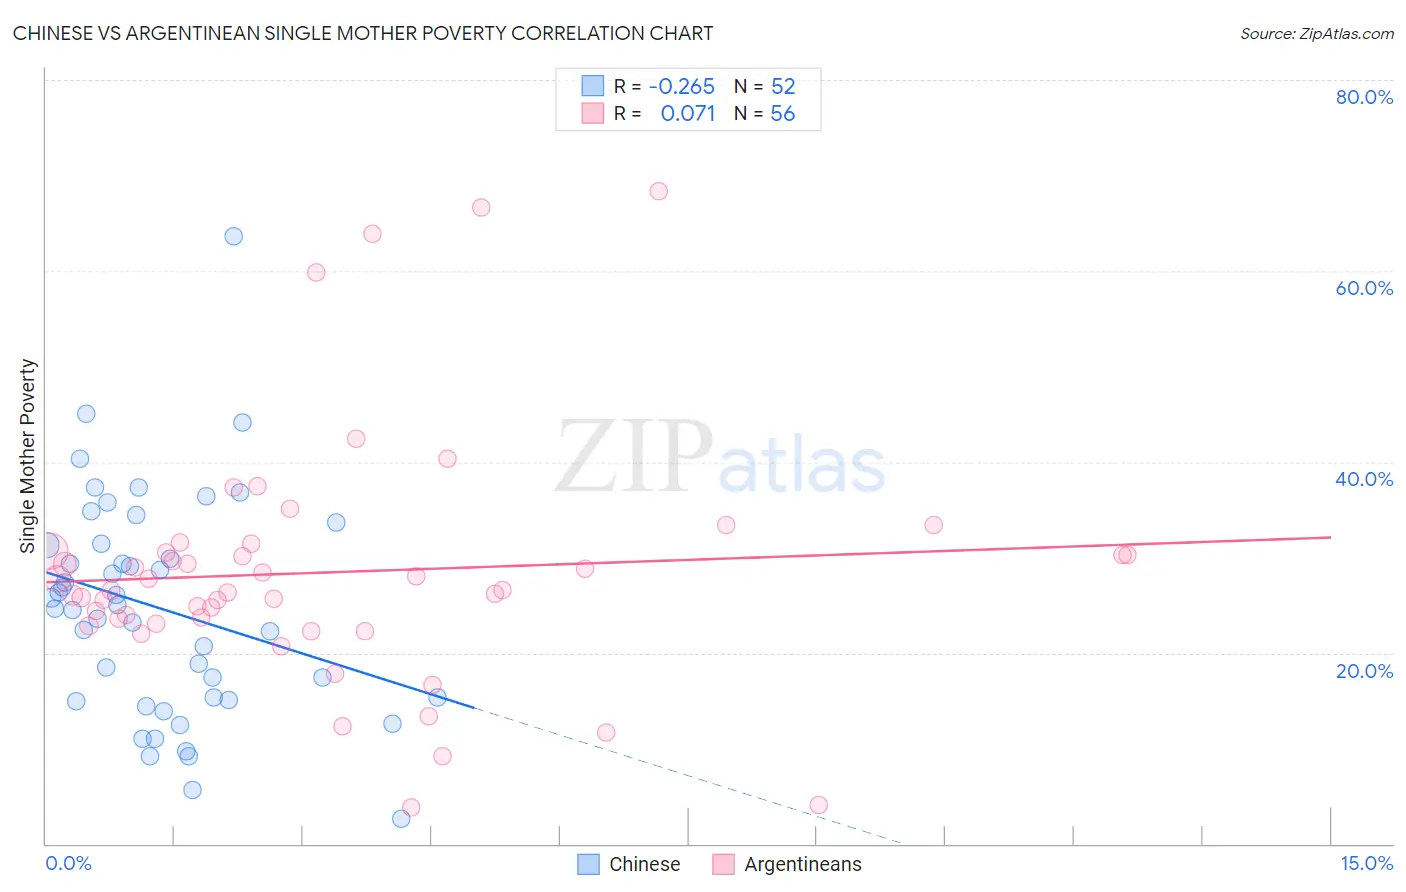 Chinese vs Argentinean Single Mother Poverty